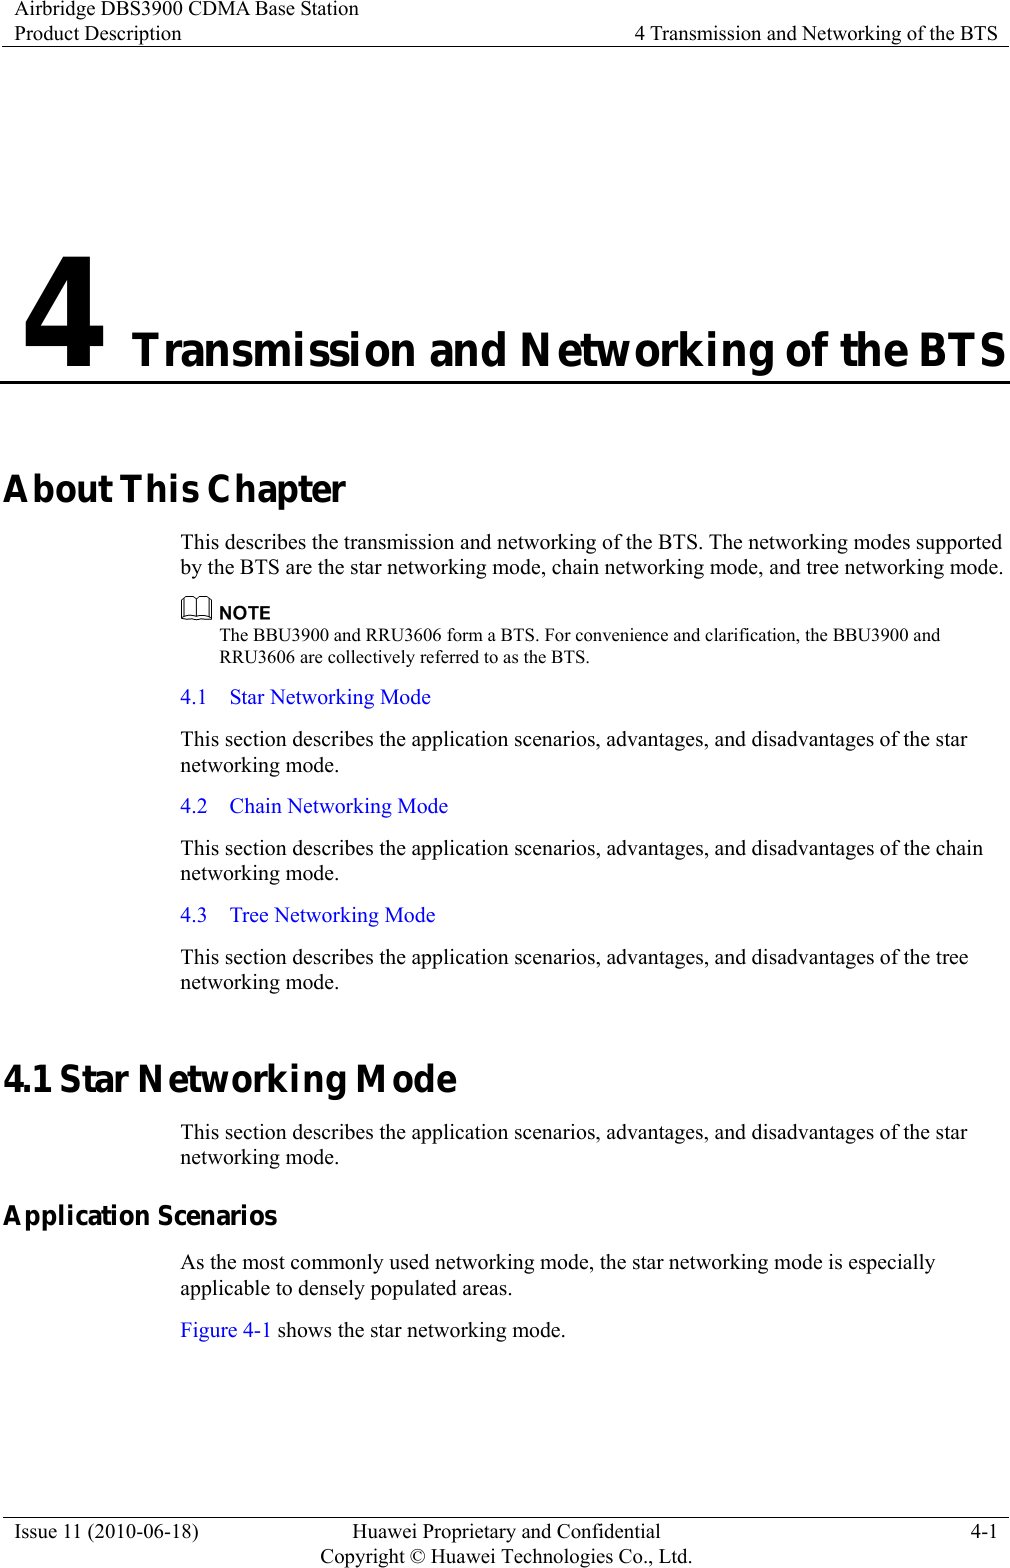 Airbridge DBS3900 CDMA Base Station Product Description  4 Transmission and Networking of the BTS Issue 11 (2010-06-18)  Huawei Proprietary and Confidential         Copyright © Huawei Technologies Co., Ltd.4-1 4 Transmission and Networking of the BTS About This Chapter This describes the transmission and networking of the BTS. The networking modes supported by the BTS are the star networking mode, chain networking mode, and tree networking mode.  The BBU3900 and RRU3606 form a BTS. For convenience and clarification, the BBU3900 and RRU3606 are collectively referred to as the BTS. 4.1  Star Networking Mode This section describes the application scenarios, advantages, and disadvantages of the star networking mode. 4.2    Chain Networking Mode This section describes the application scenarios, advantages, and disadvantages of the chain networking mode. 4.3    Tree Networking Mode This section describes the application scenarios, advantages, and disadvantages of the tree networking mode. 4.1 Star Networking Mode This section describes the application scenarios, advantages, and disadvantages of the star networking mode. Application Scenarios As the most commonly used networking mode, the star networking mode is especially applicable to densely populated areas. Figure 4-1 shows the star networking mode. 